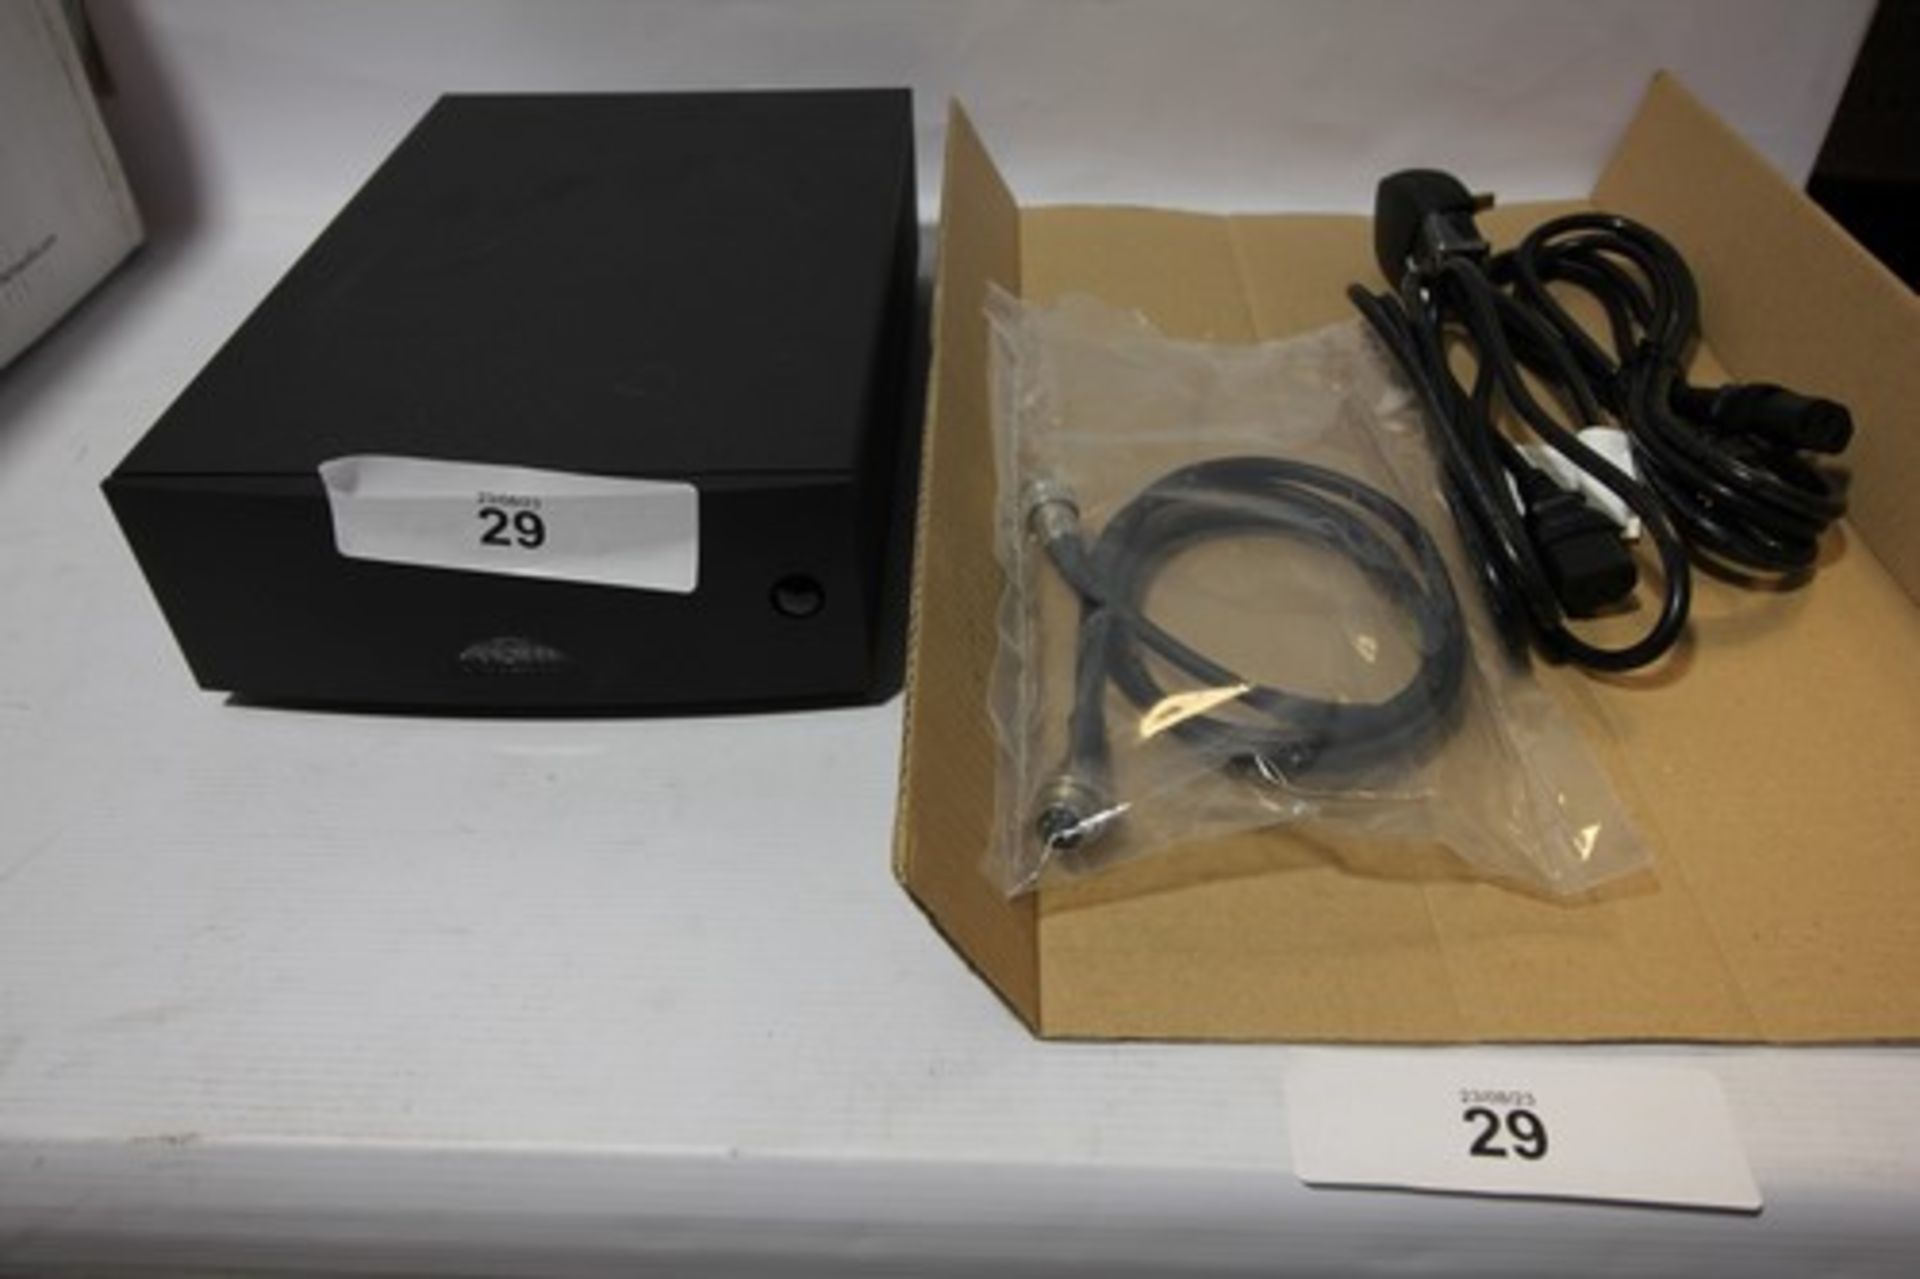 1 x Niam audio hi-cap power supply unit, Model 00-003-0108, powers on ok but not fully tested, RRP